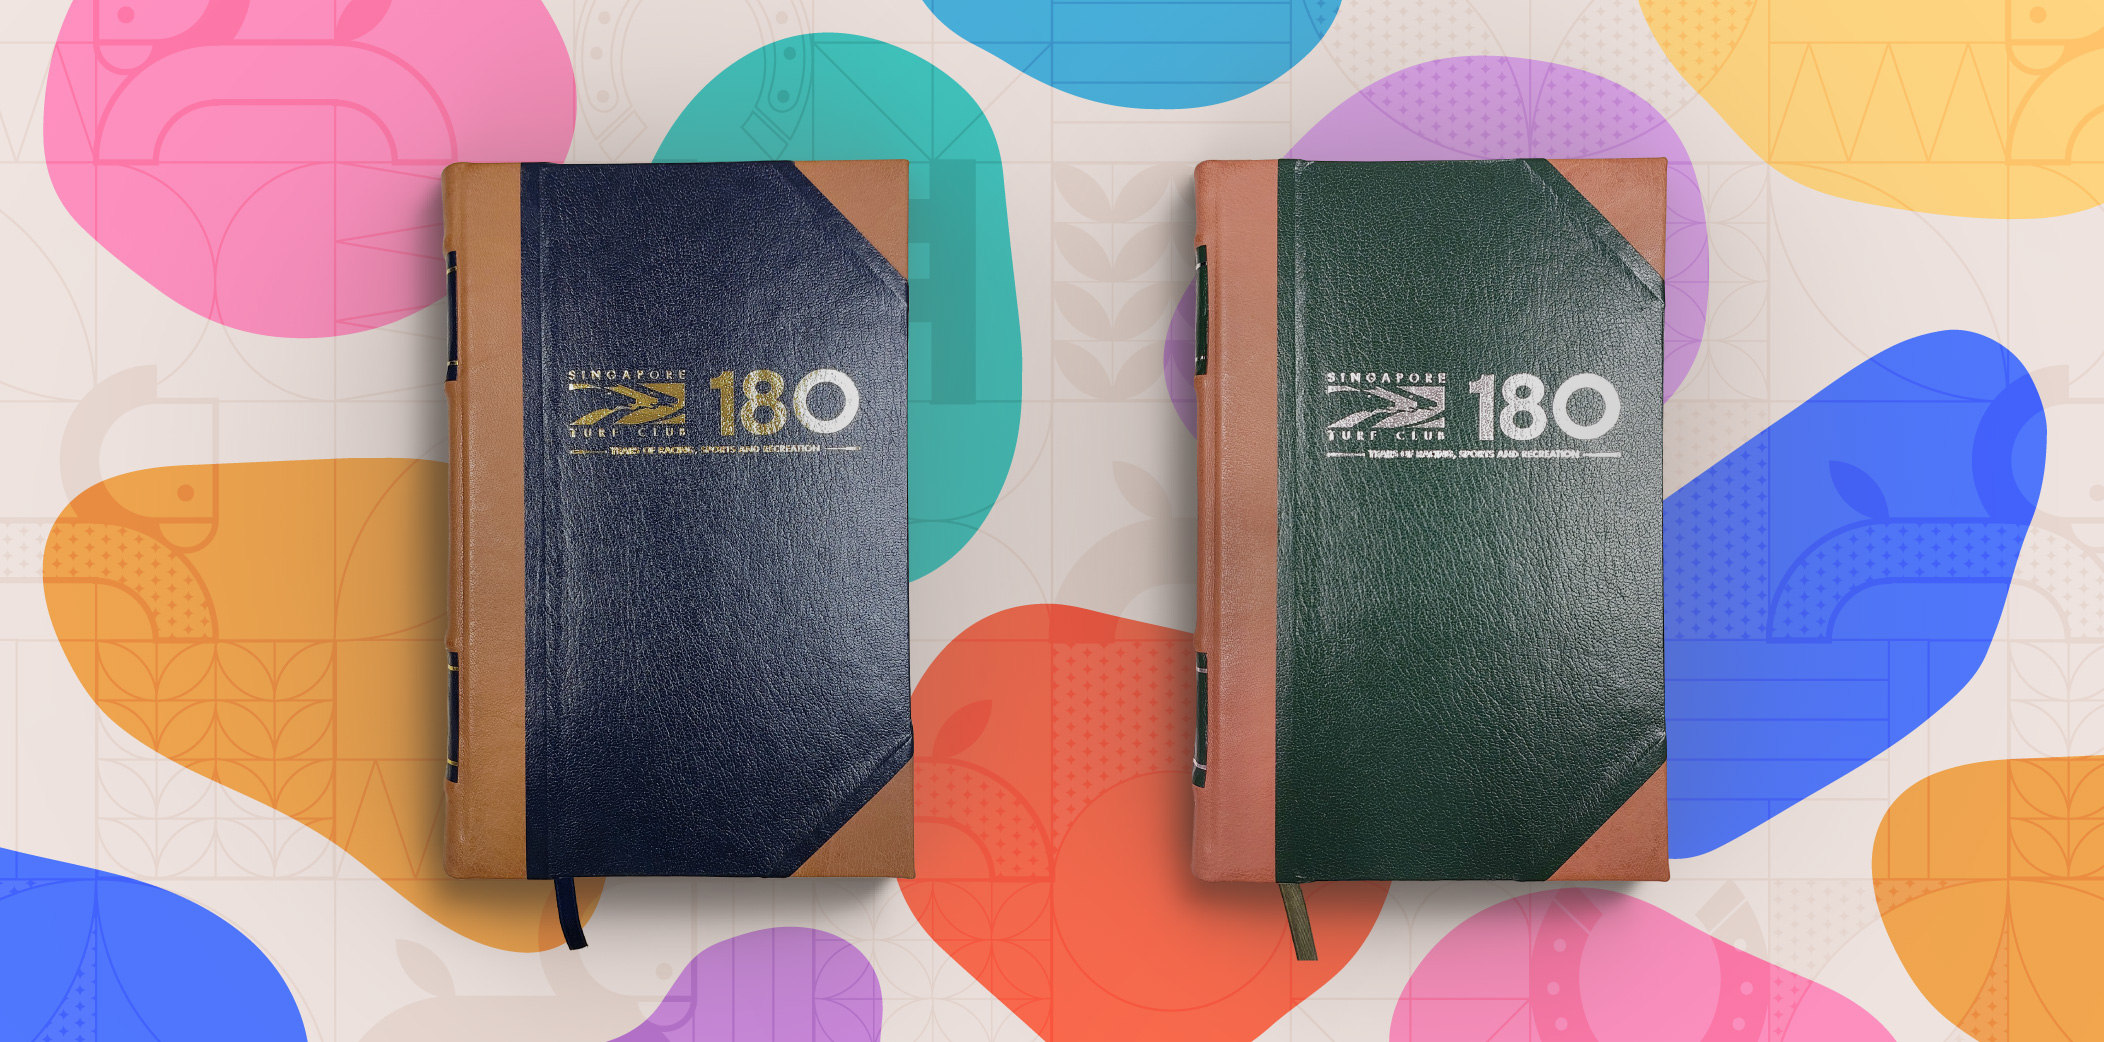 2 customised half-leather bound journals in blue on the left and green on the right.